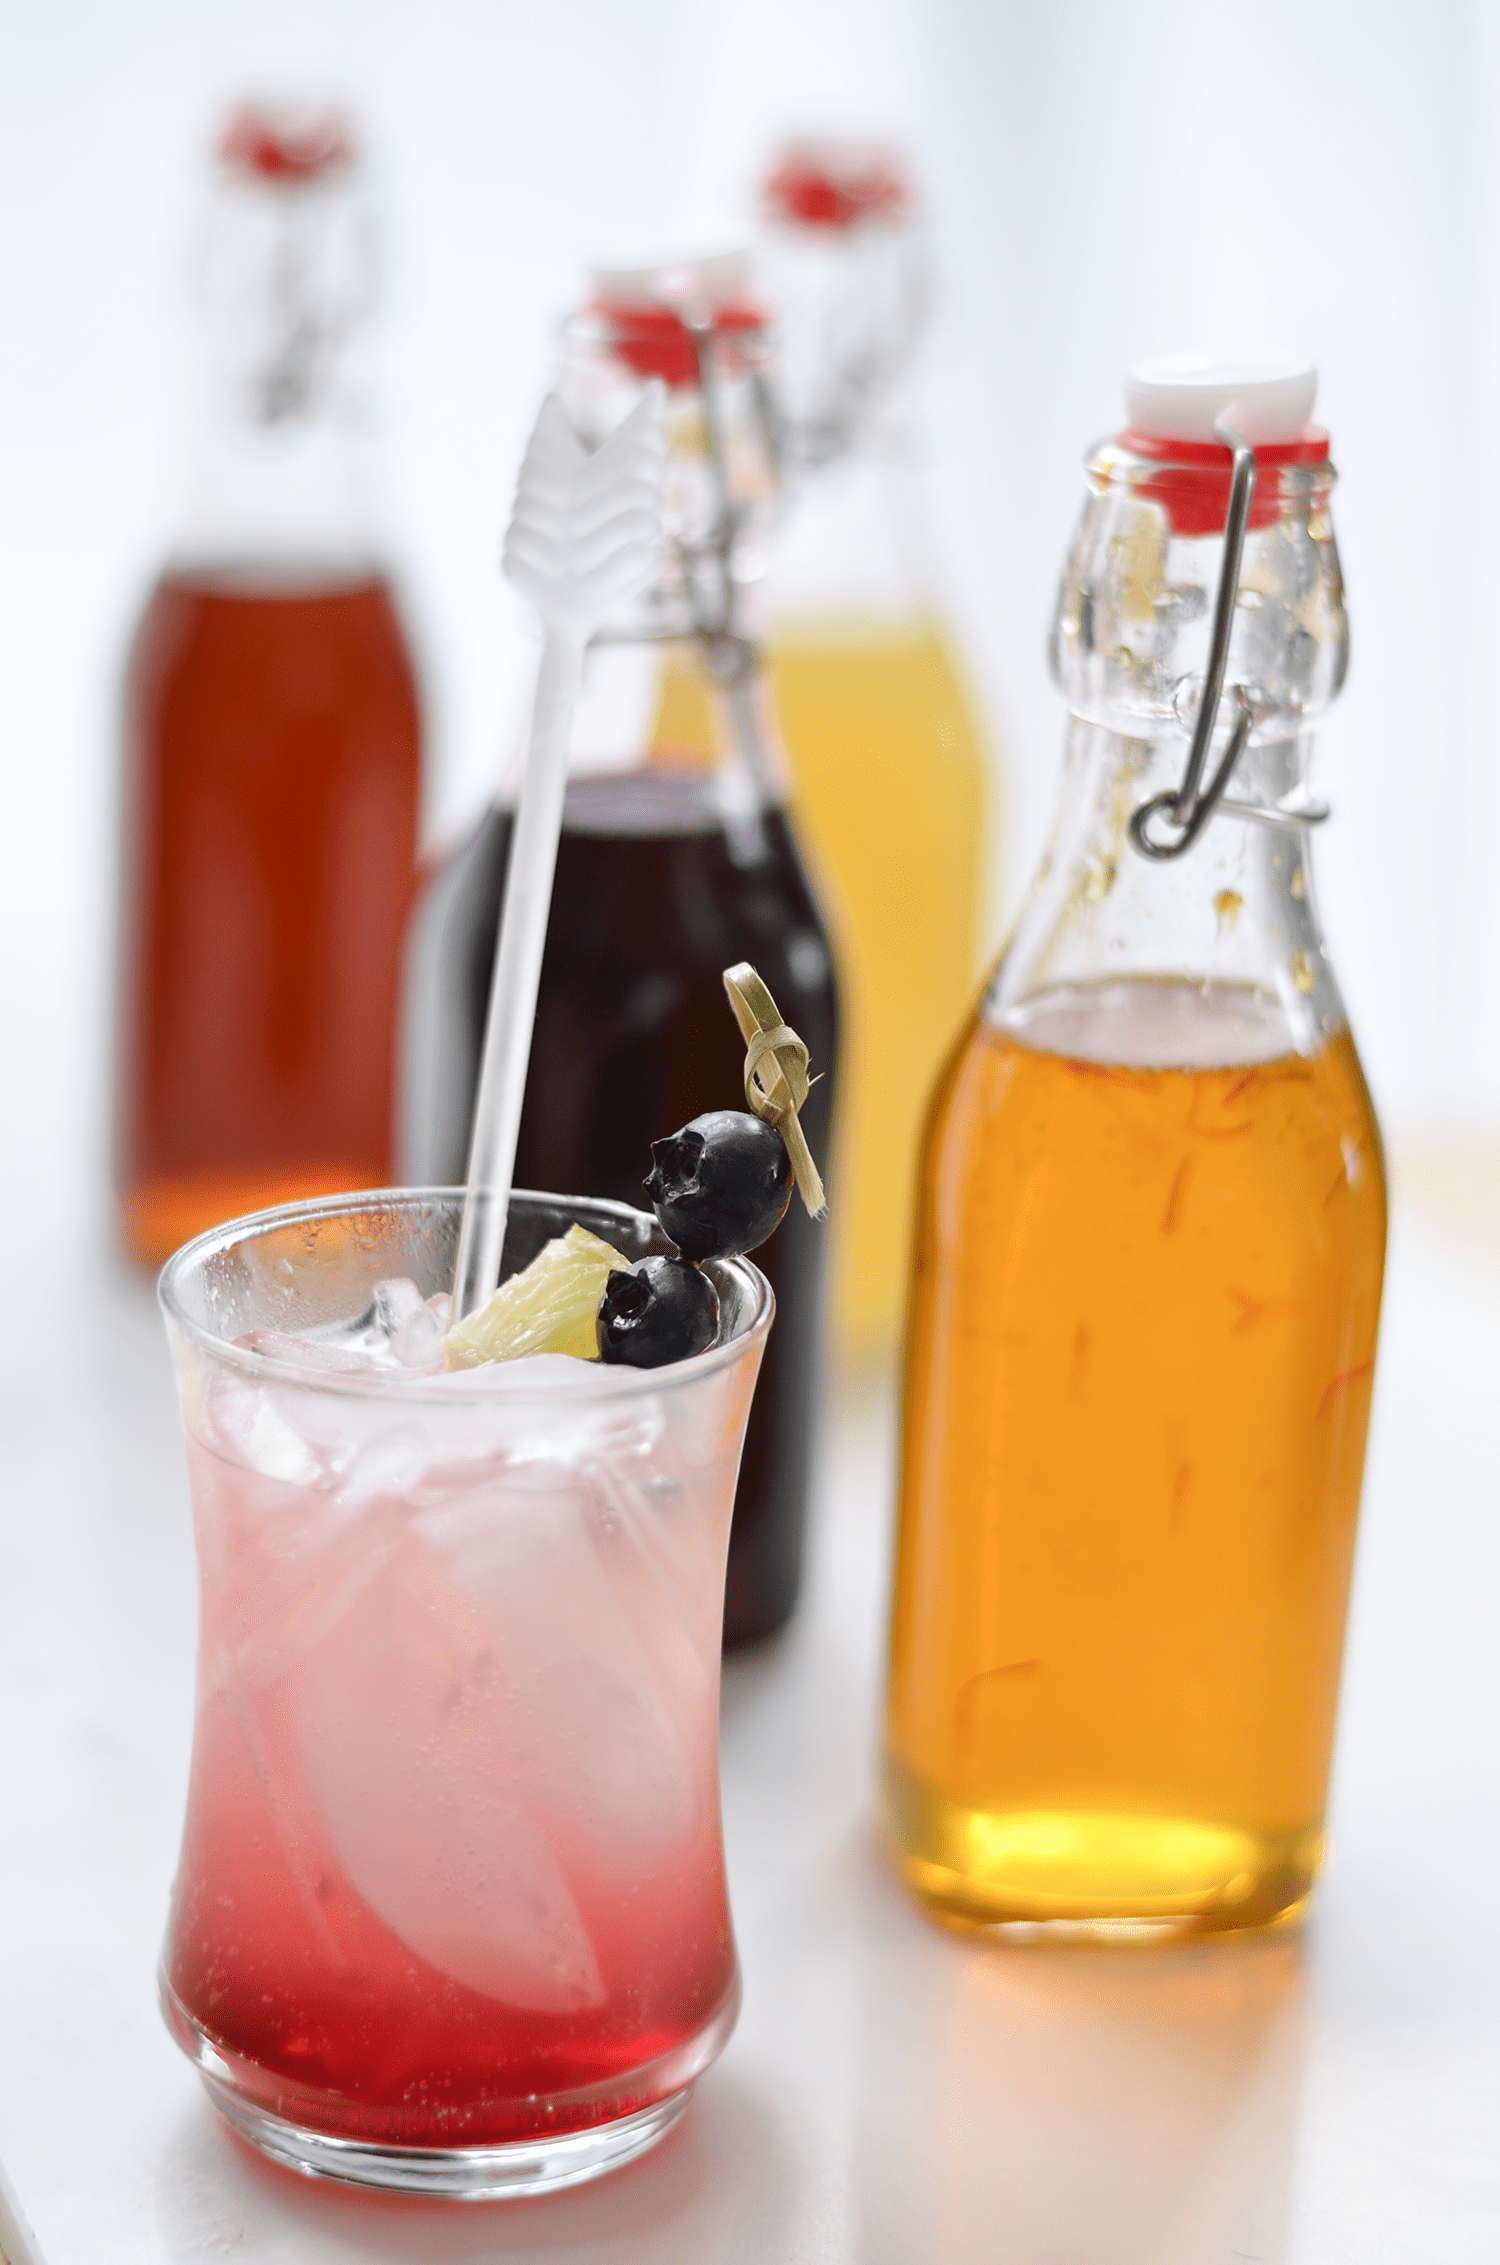 Make Your Own Flavored Simple Syrups - Four Ways! (Click through for recipe)